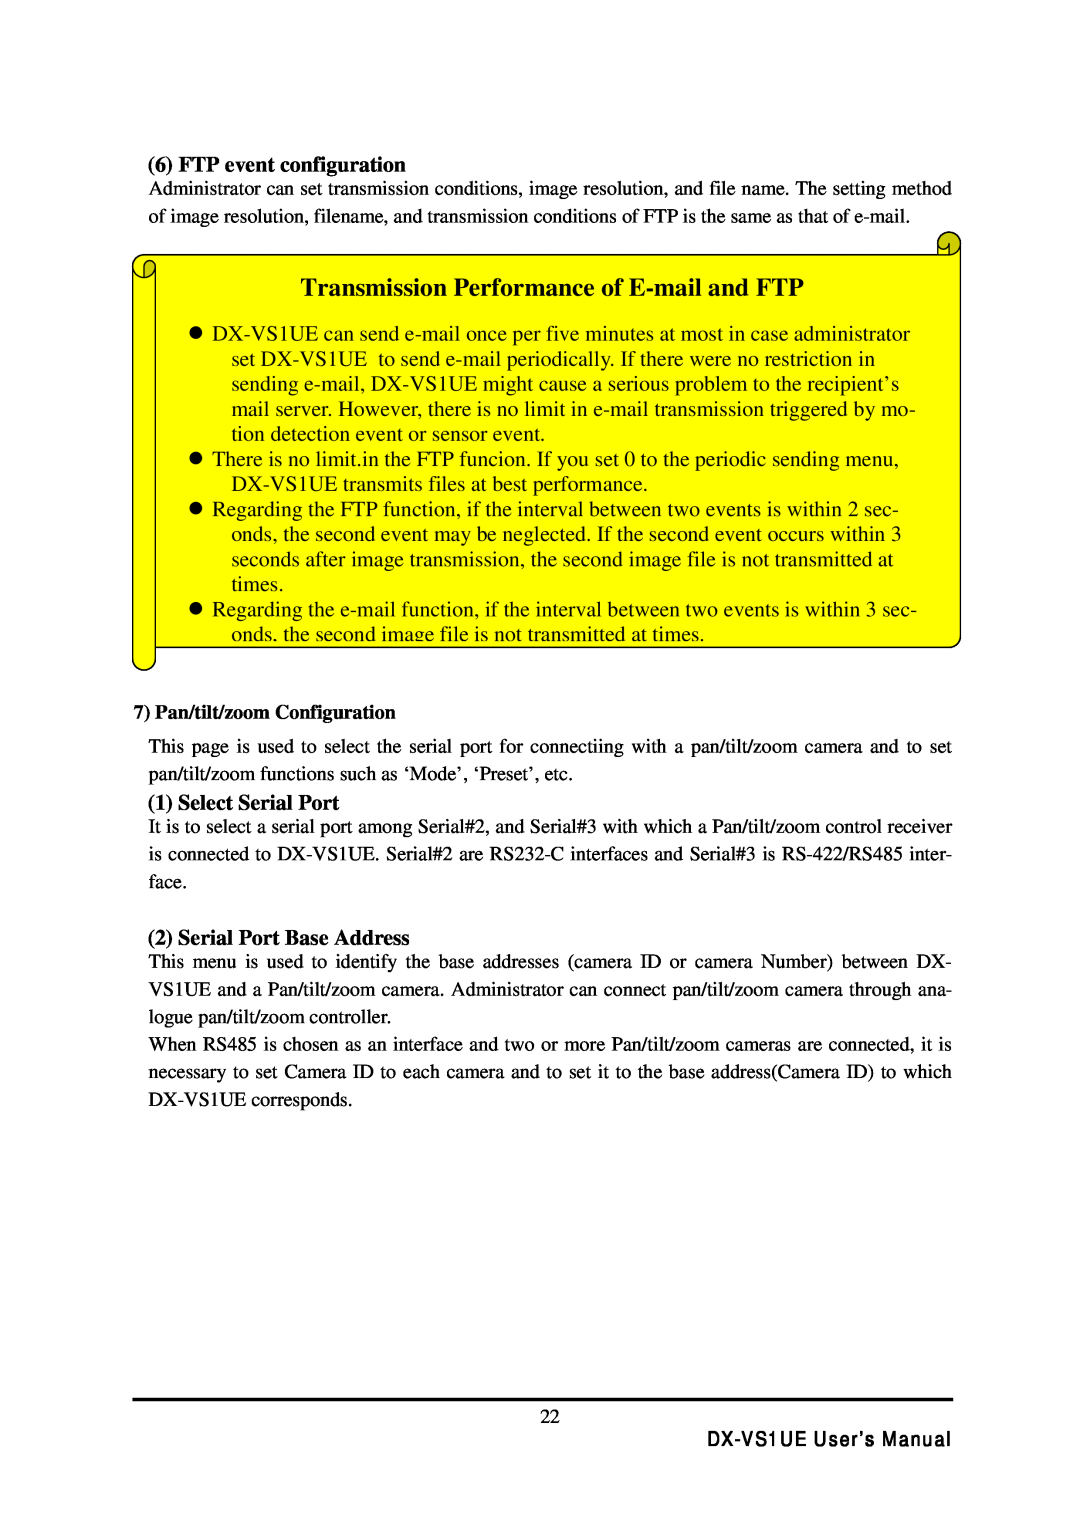 Mitsubishi Electronics DX-VS1 Transmission Performance of E-mail and FTP, FTP event configuration, Select Serial Port 